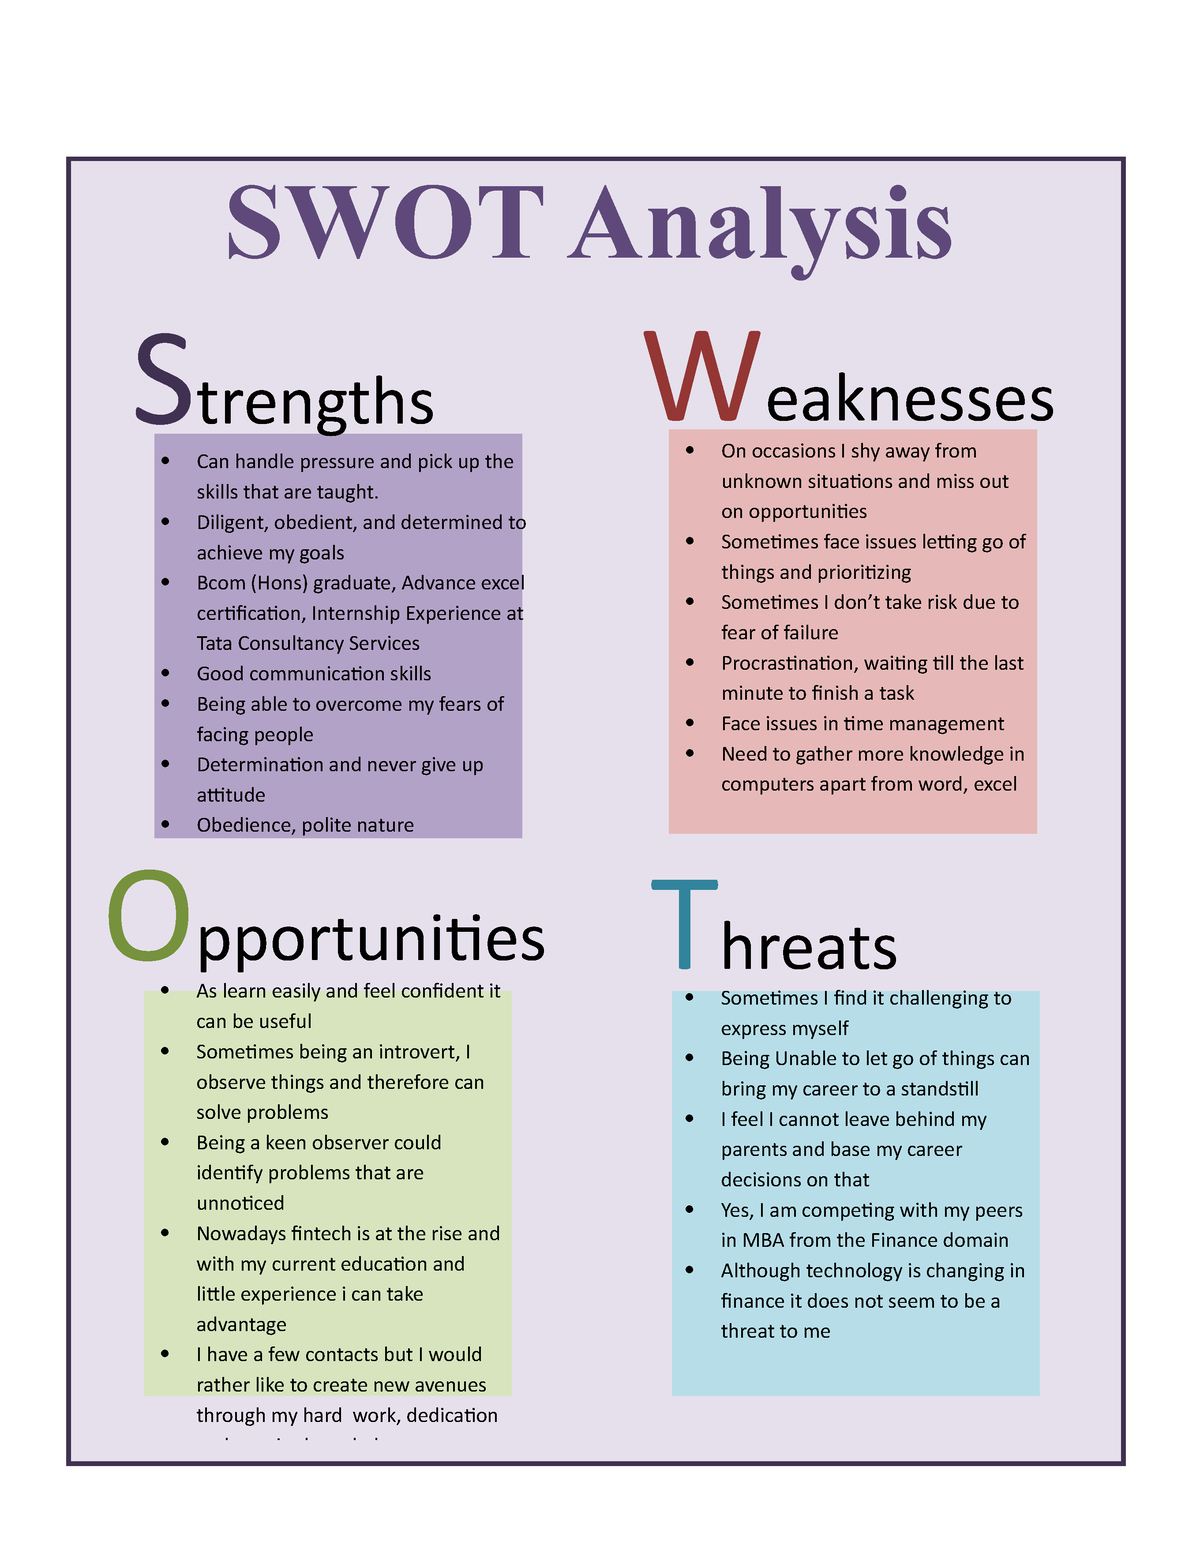 Swot analysis template 11 - Sometimes I find it challenging to express ...